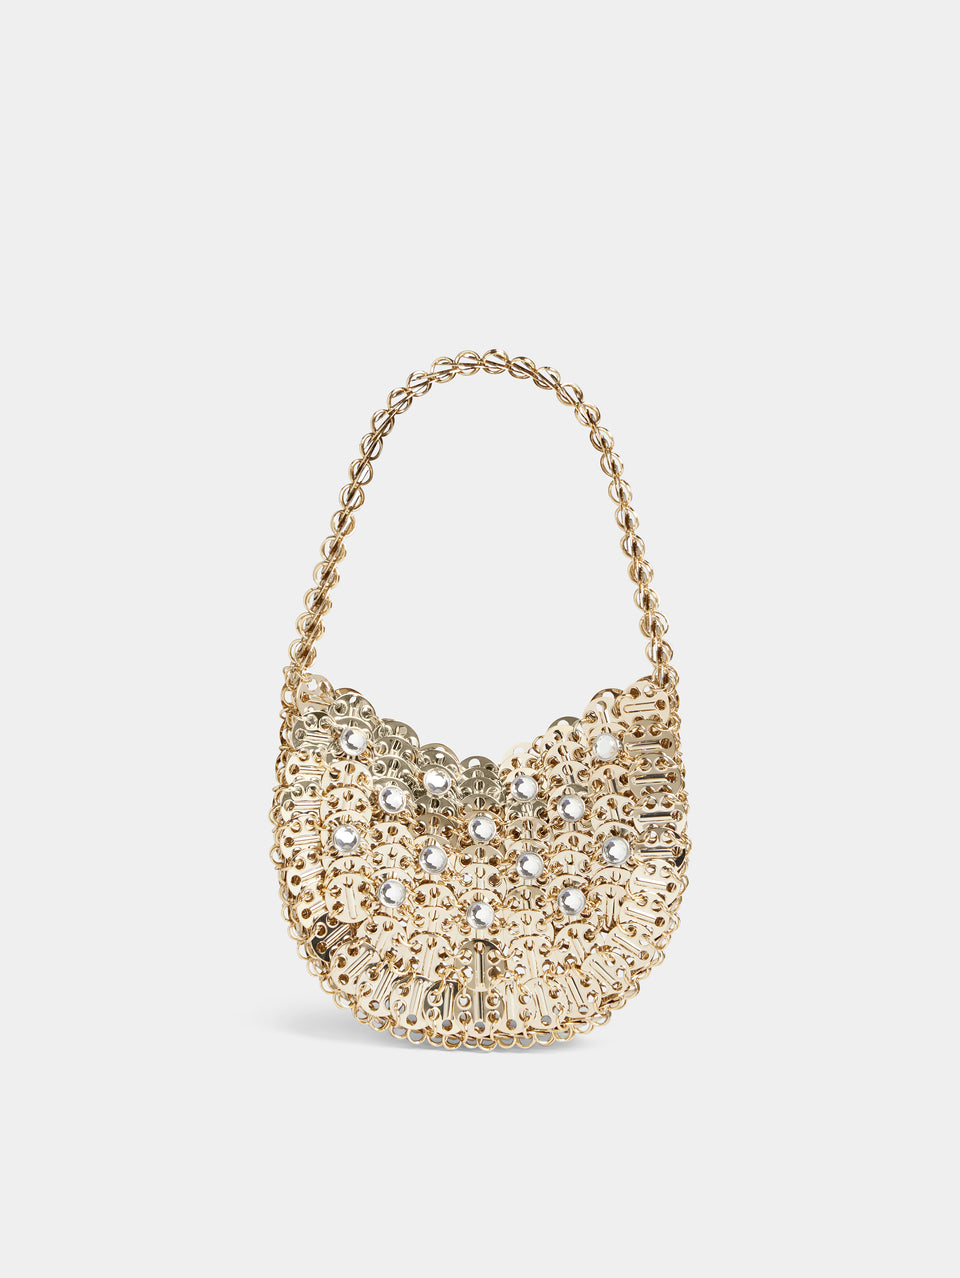 Sac Moon or et strass 1969